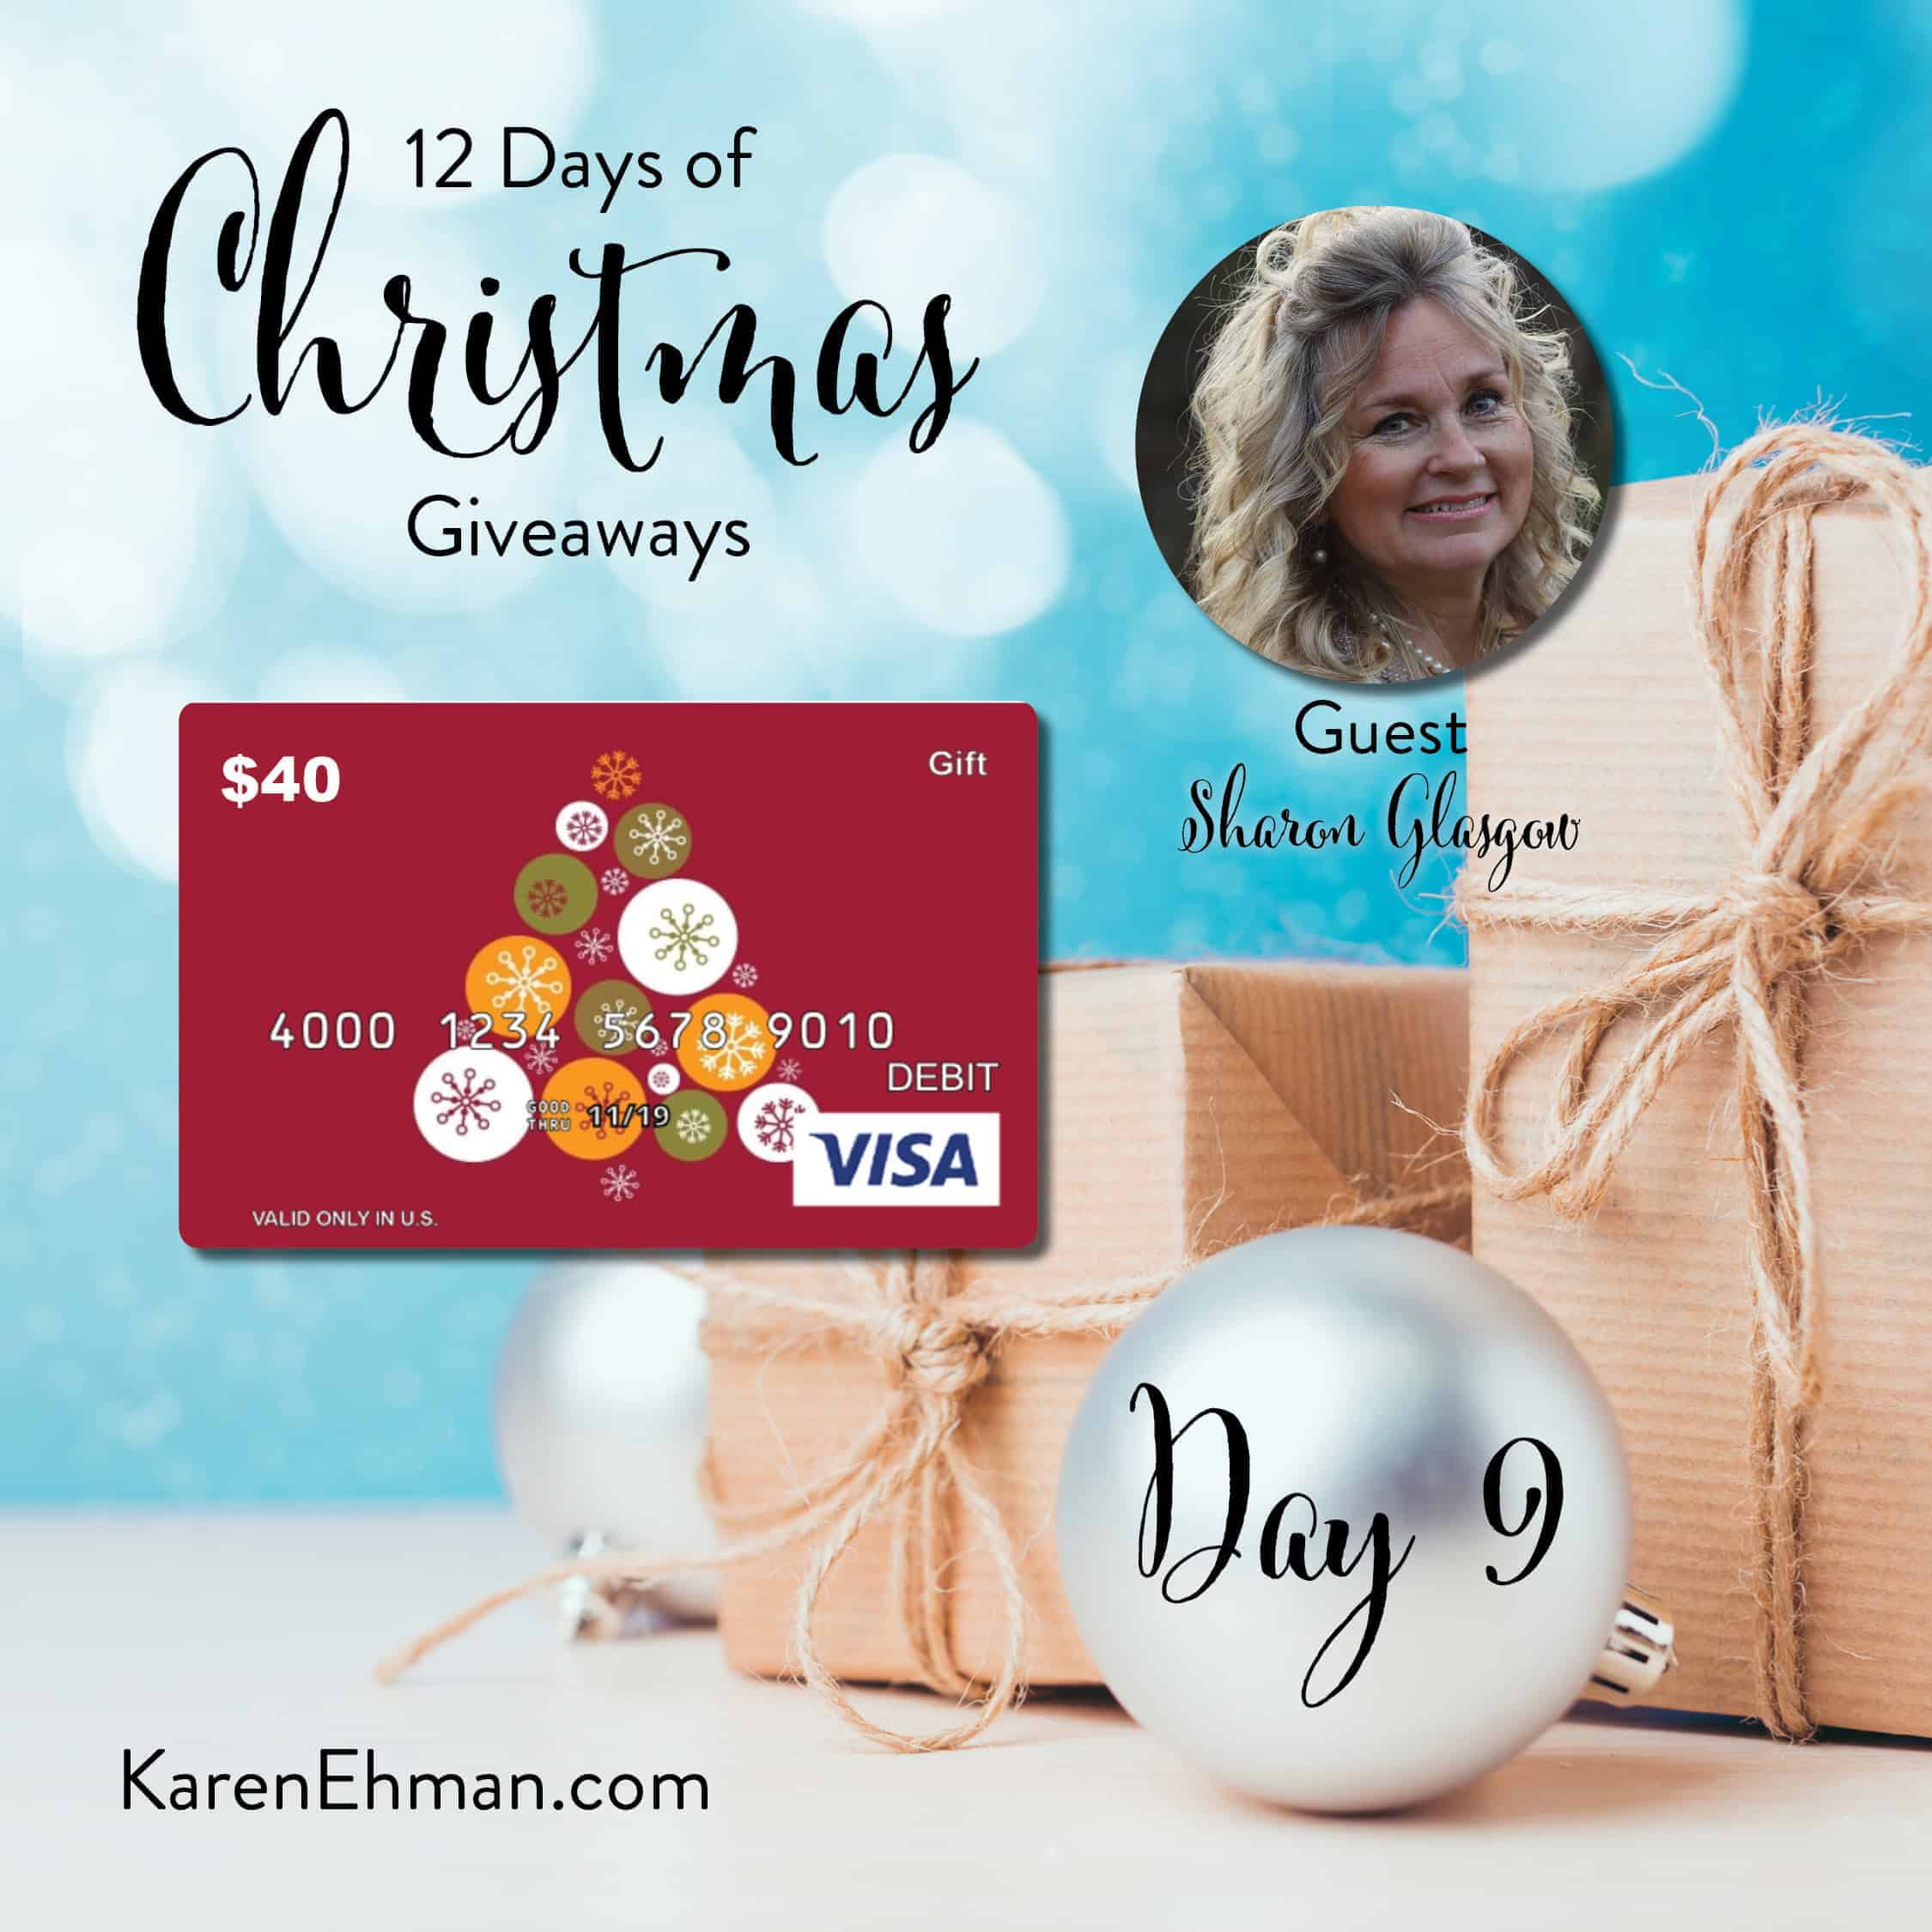 Day 9 of 12 Days of Christmas Giveaways (with Sharon Glasgow)